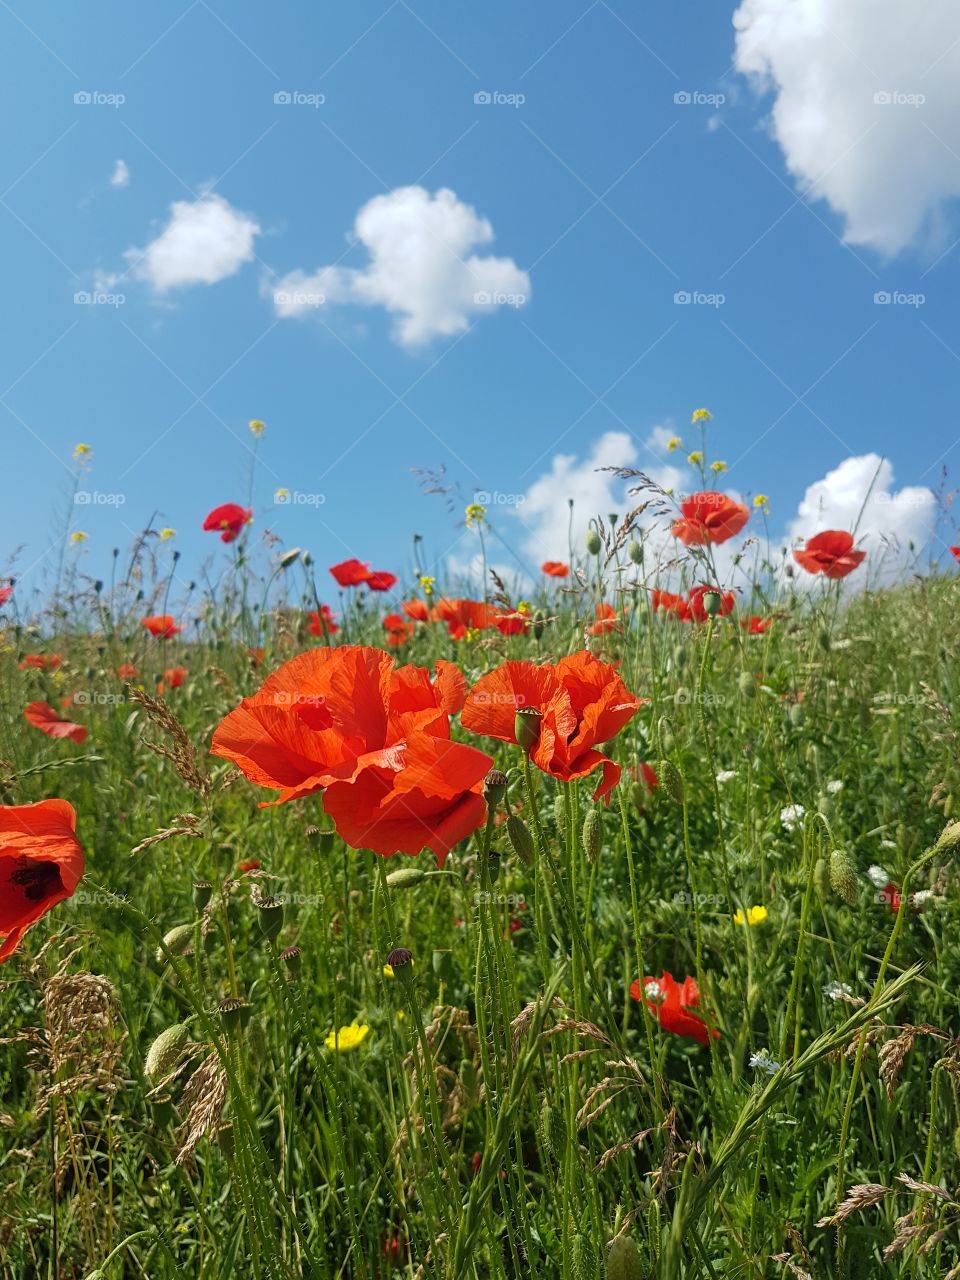 red poppies on the field overlooking the blue sky